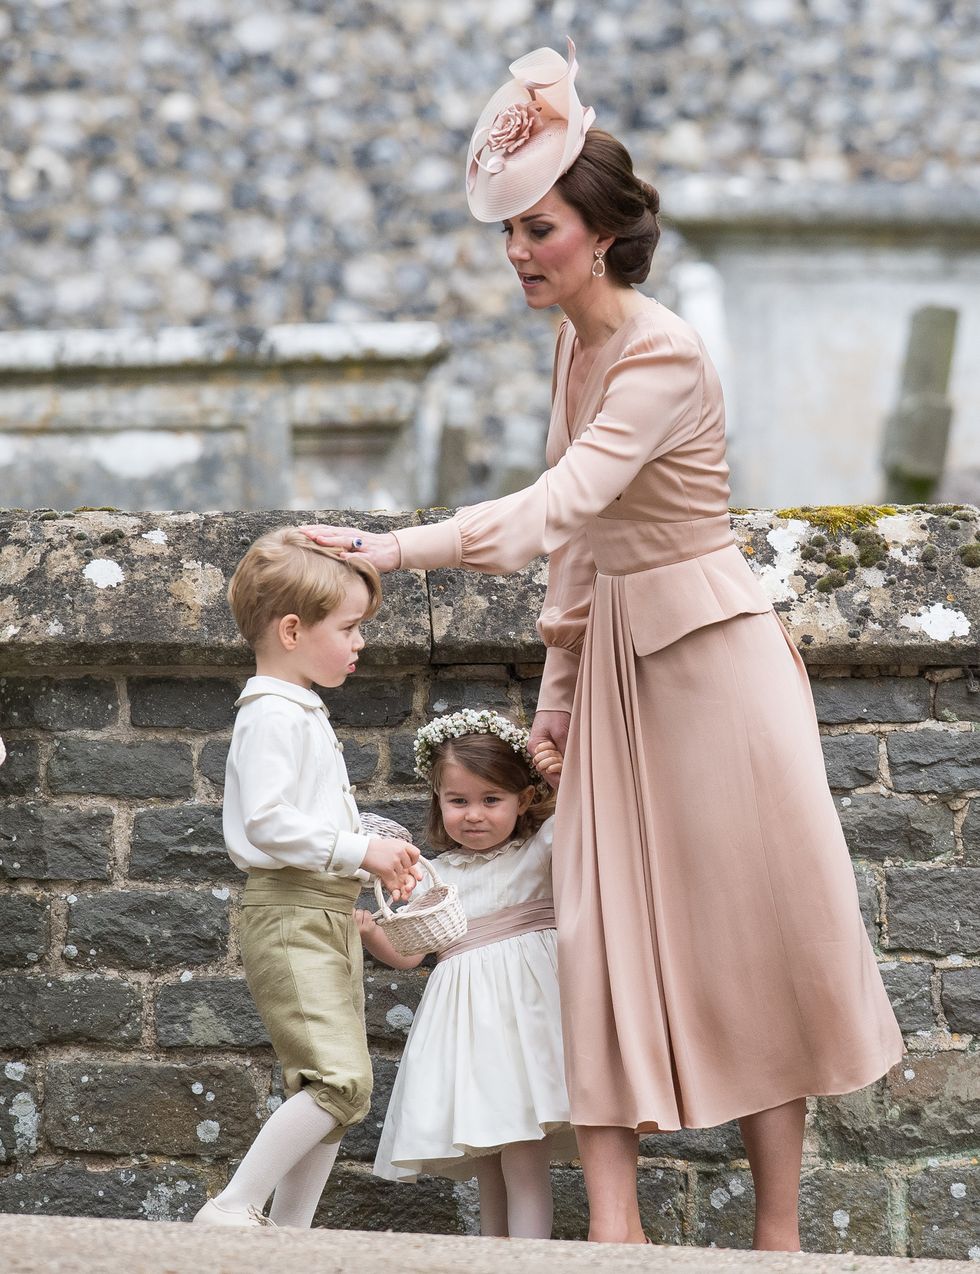 Prince George and Princess Charlotte with the Duchess of Cambridge at Pippa Middleton's wedding​